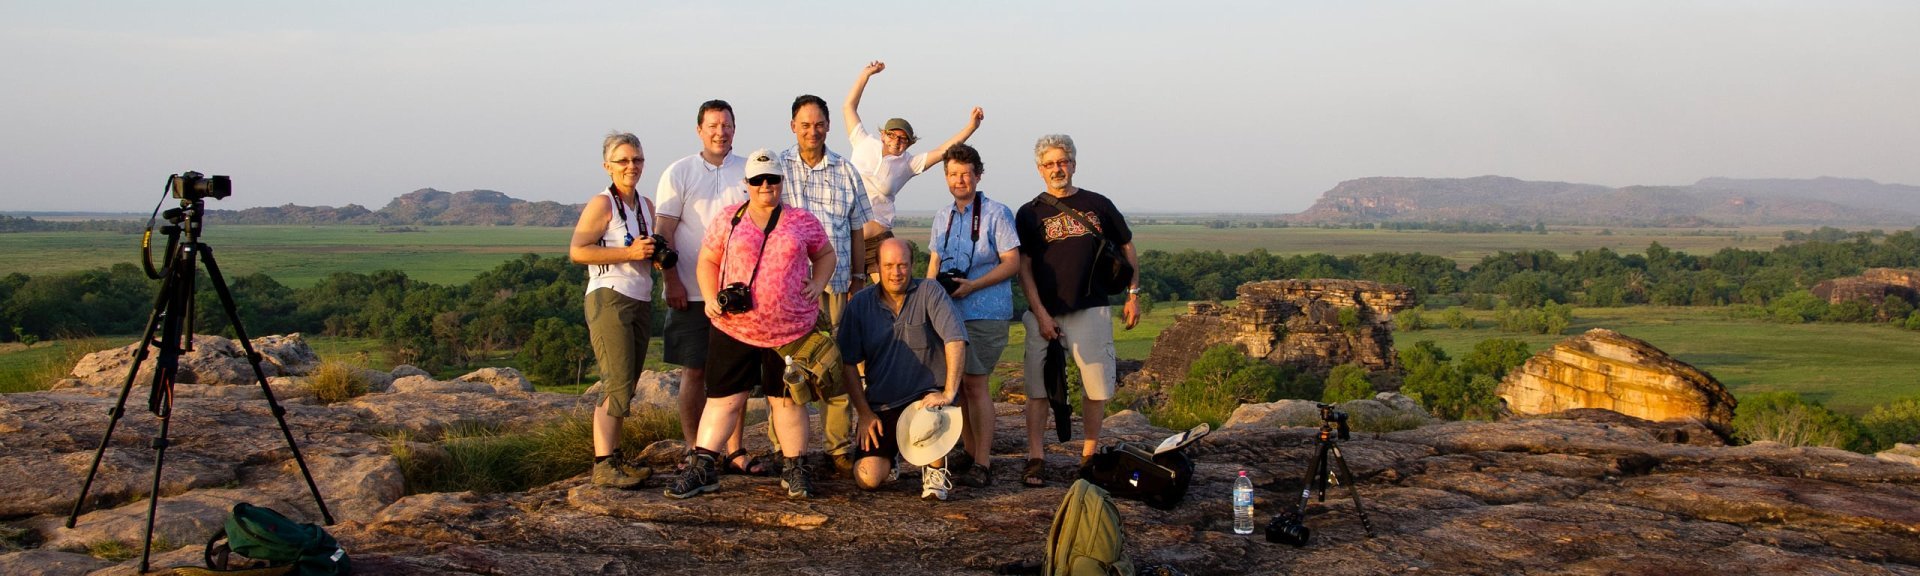 Photography tour at Ubirr. Photo: Andrew Goodall